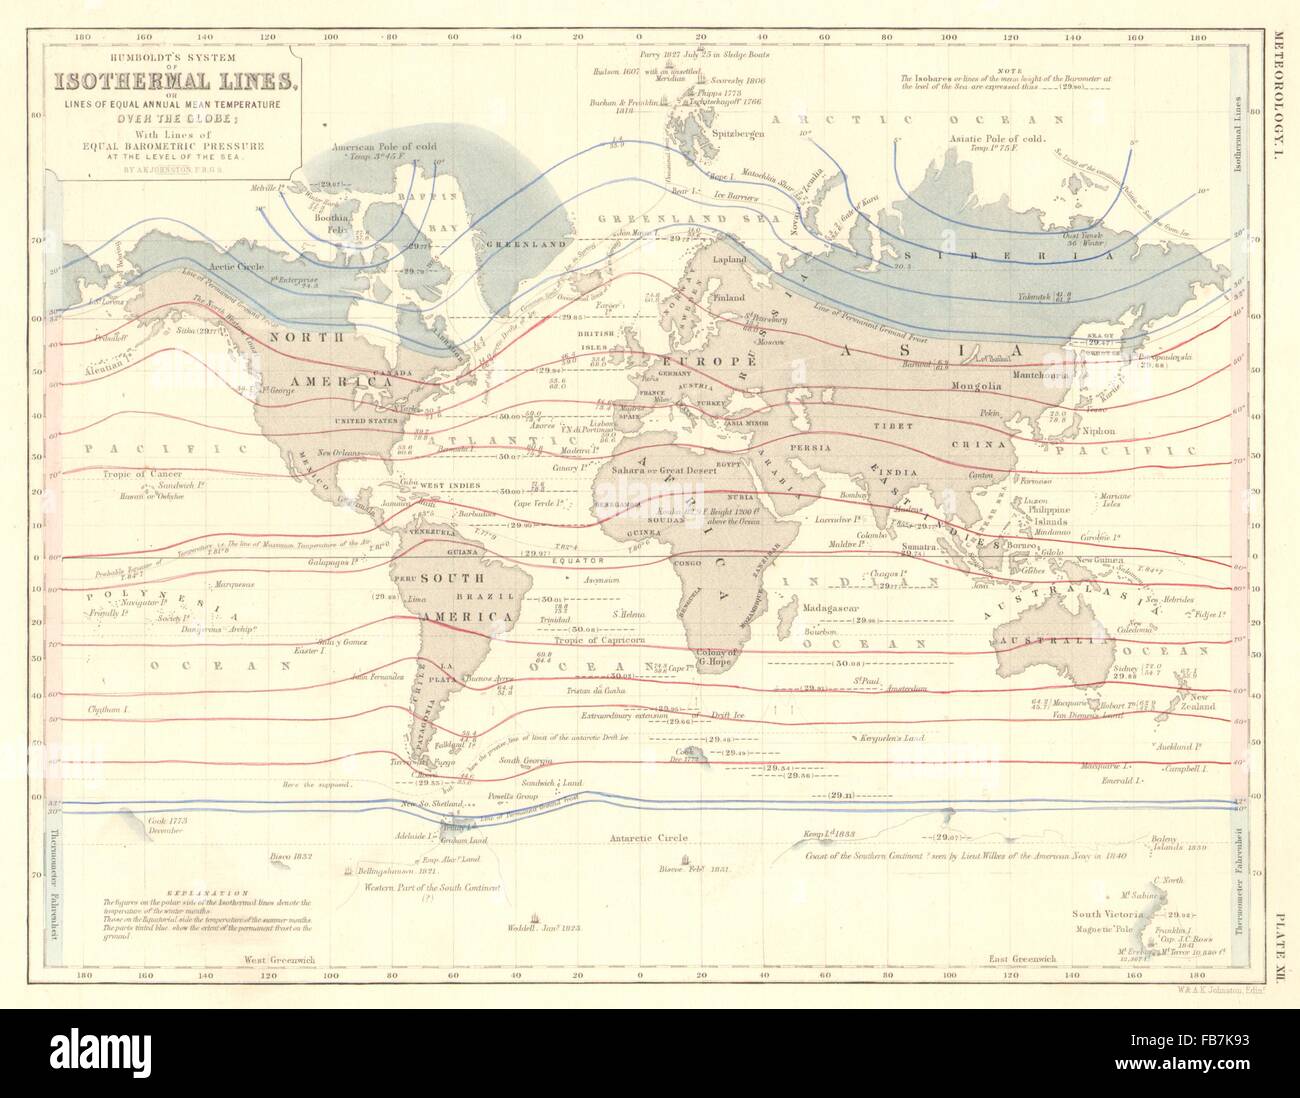 WORLD: Humboldt's isothermal lines (equal annual mean temperature), 1850 map Stock Photo